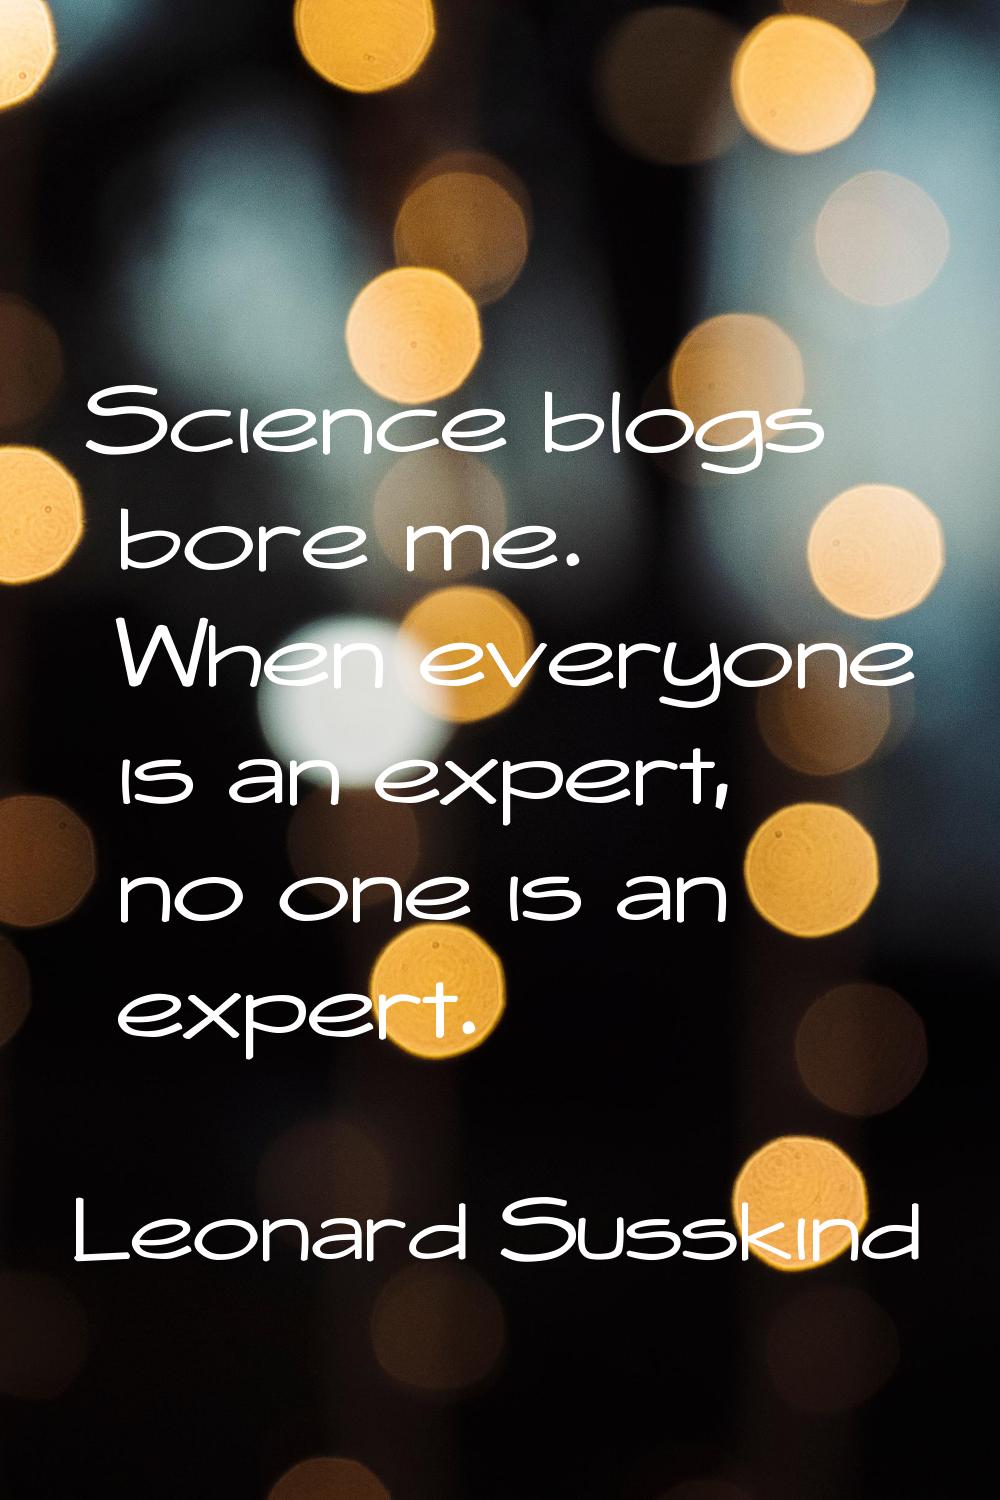 Science blogs bore me. When everyone is an expert, no one is an expert.